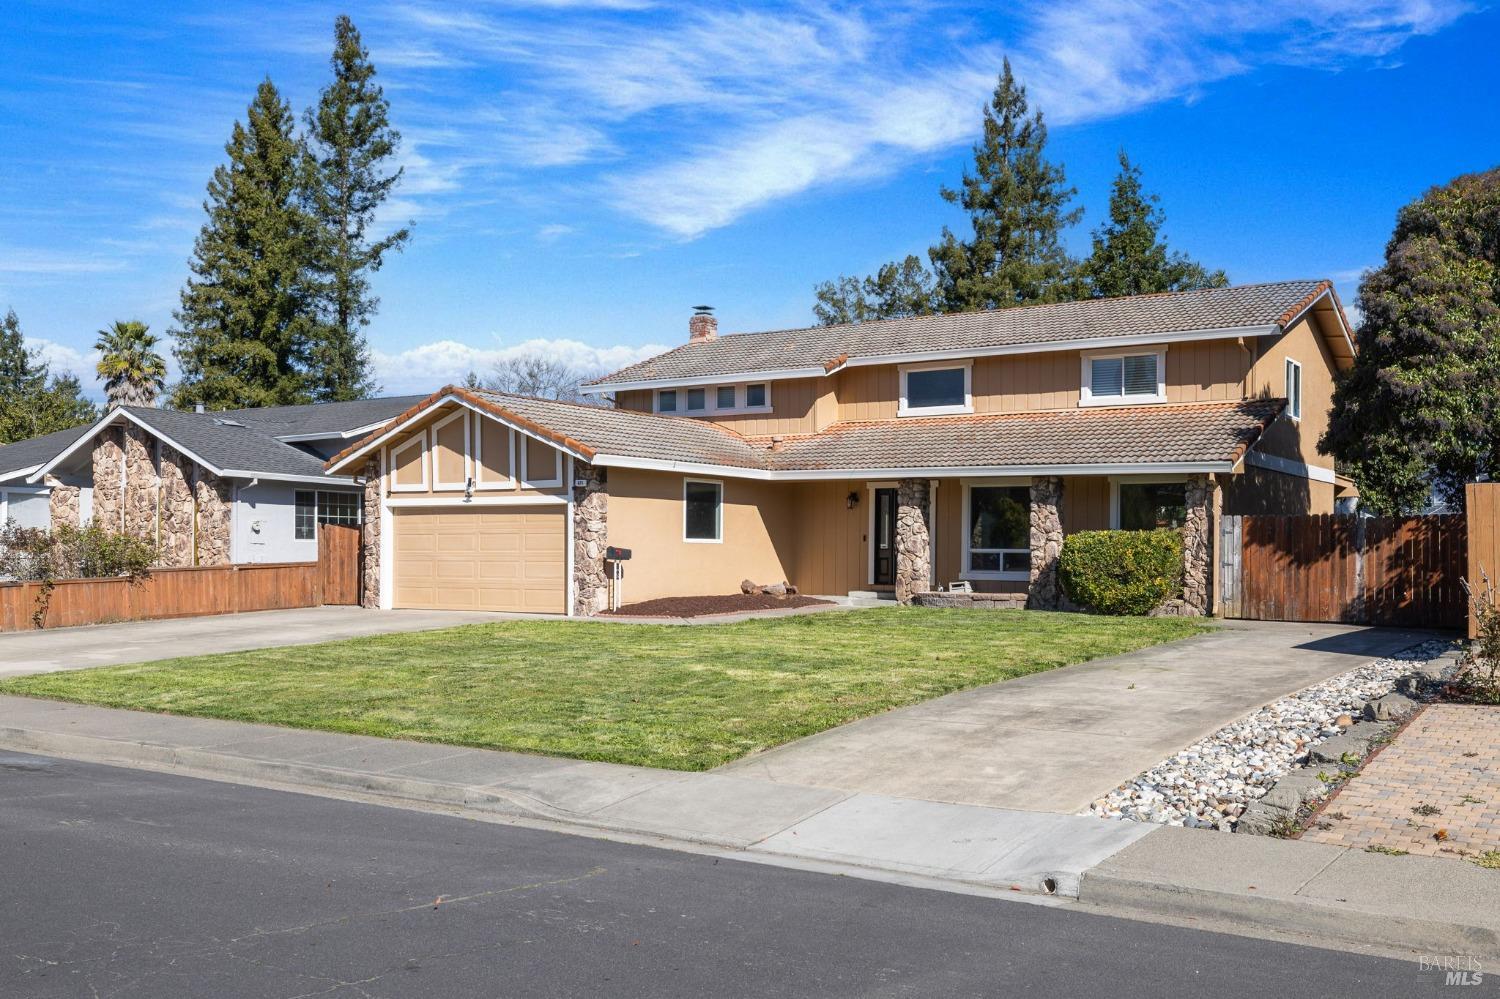 Welcome to 825 Santa Dorotea Circle, Rohnert Park.  4 bedrooms and 3 full baths with approx. 2,440 sqft